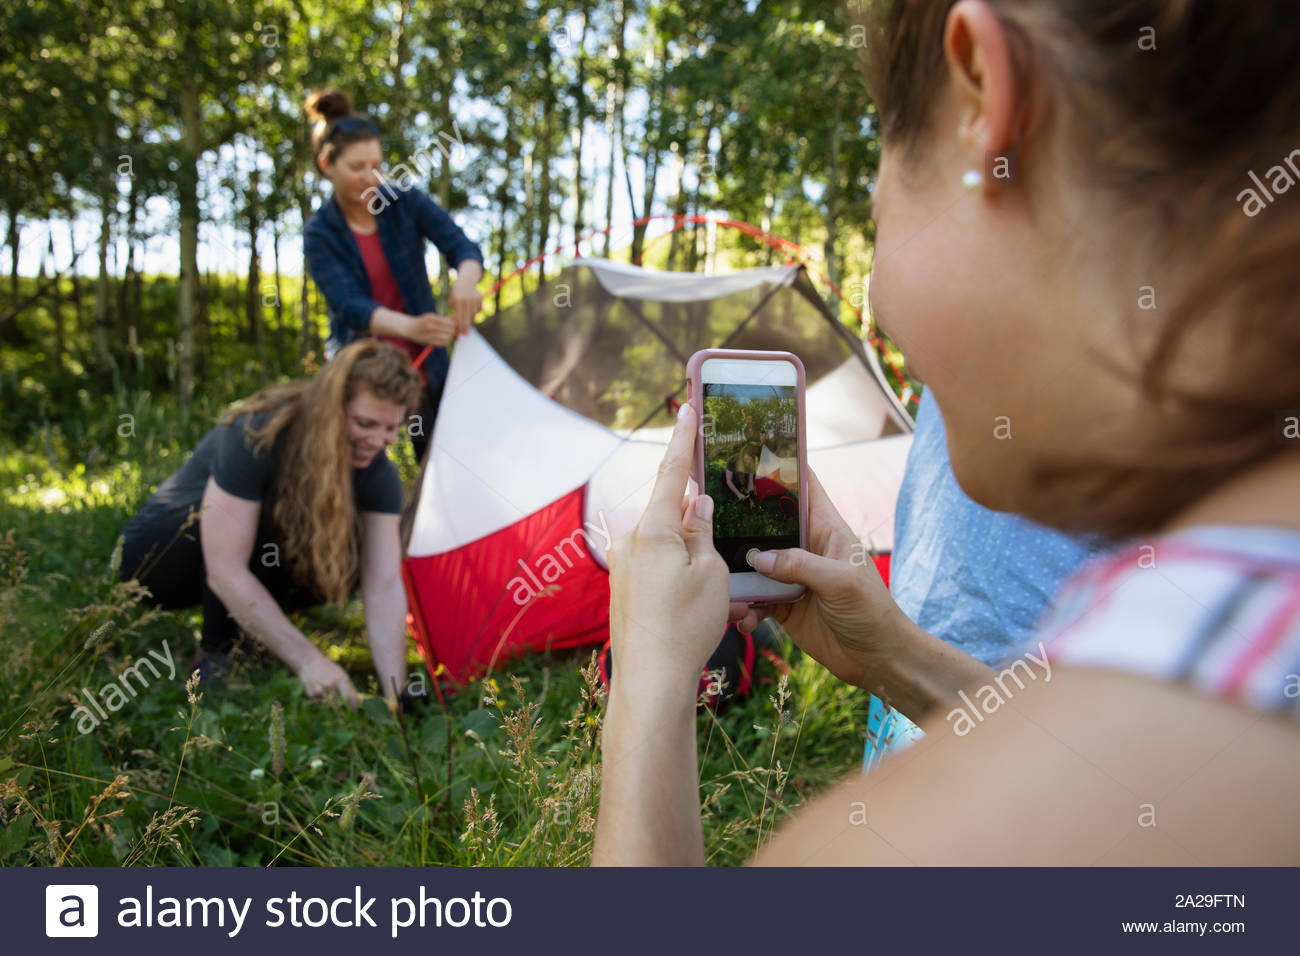 Woman filming friends putting up tent Stock Photo